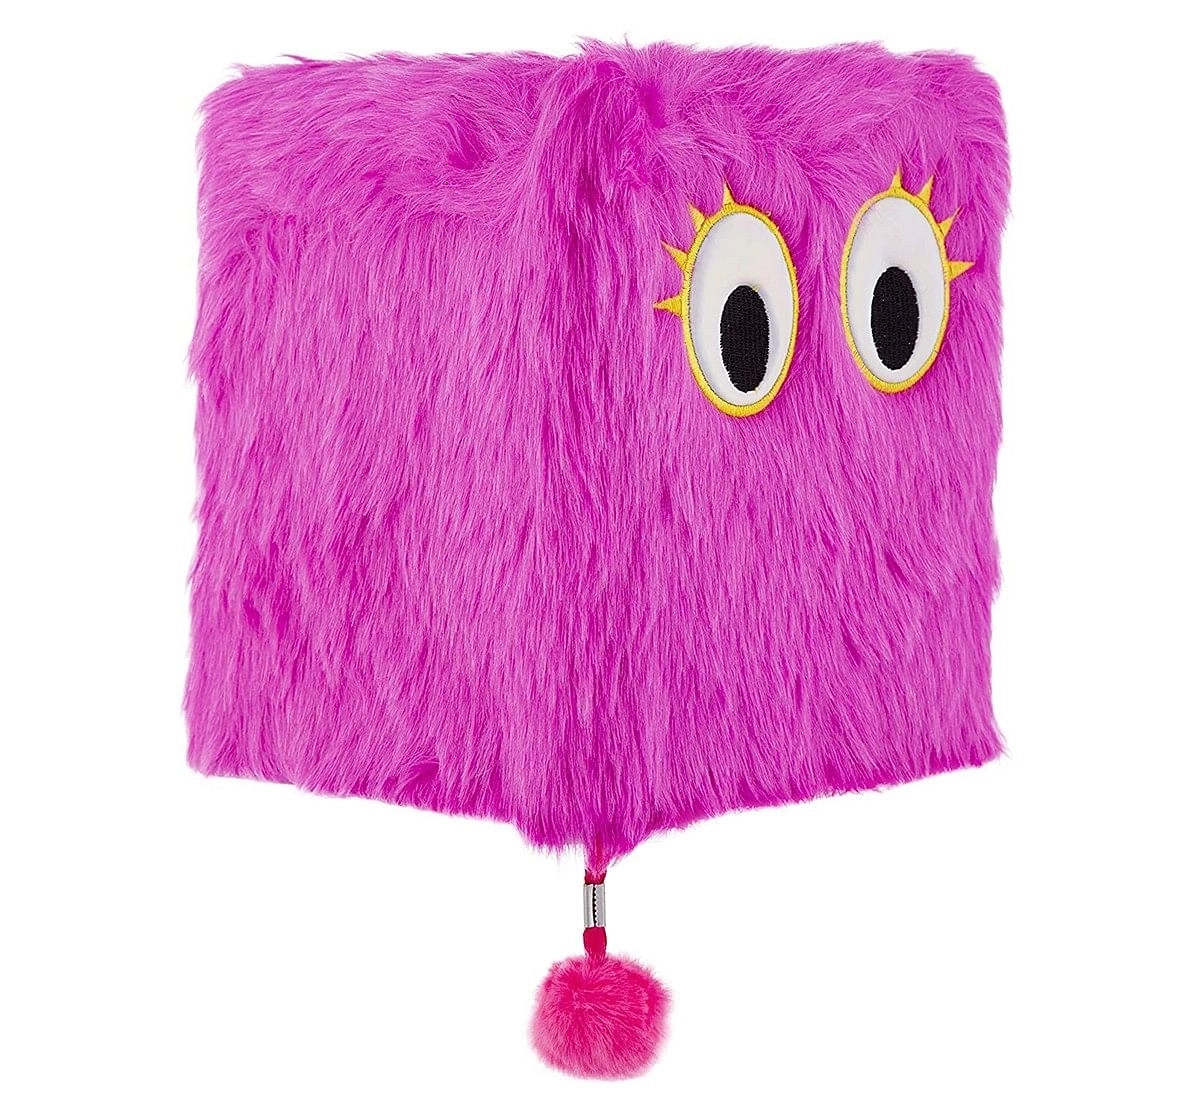 Mirada  Fluffy Plush Study & Desk Accessories for Kids age 3Y+ (Pink)